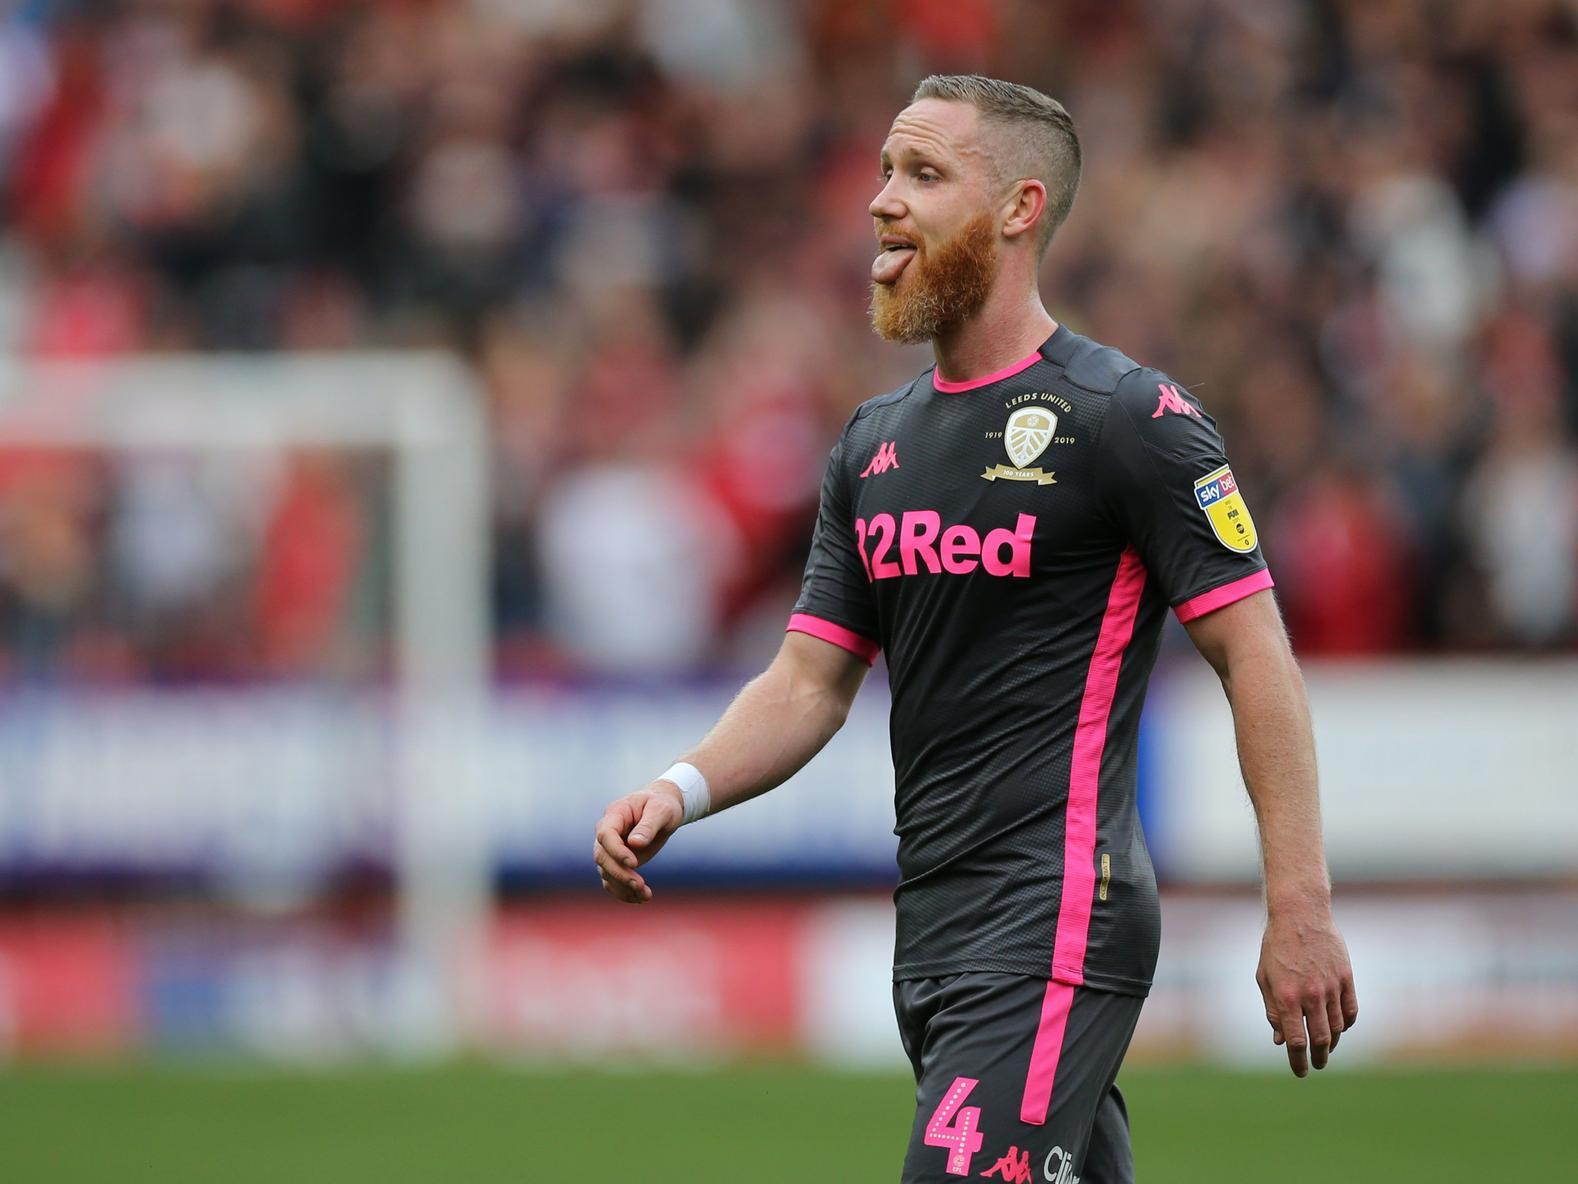 Cardiff made a concerted bid to land him but Leeds were equally willing to meet Middlesbrough's valuation of 3m and he accepted the offer from Elland Road.